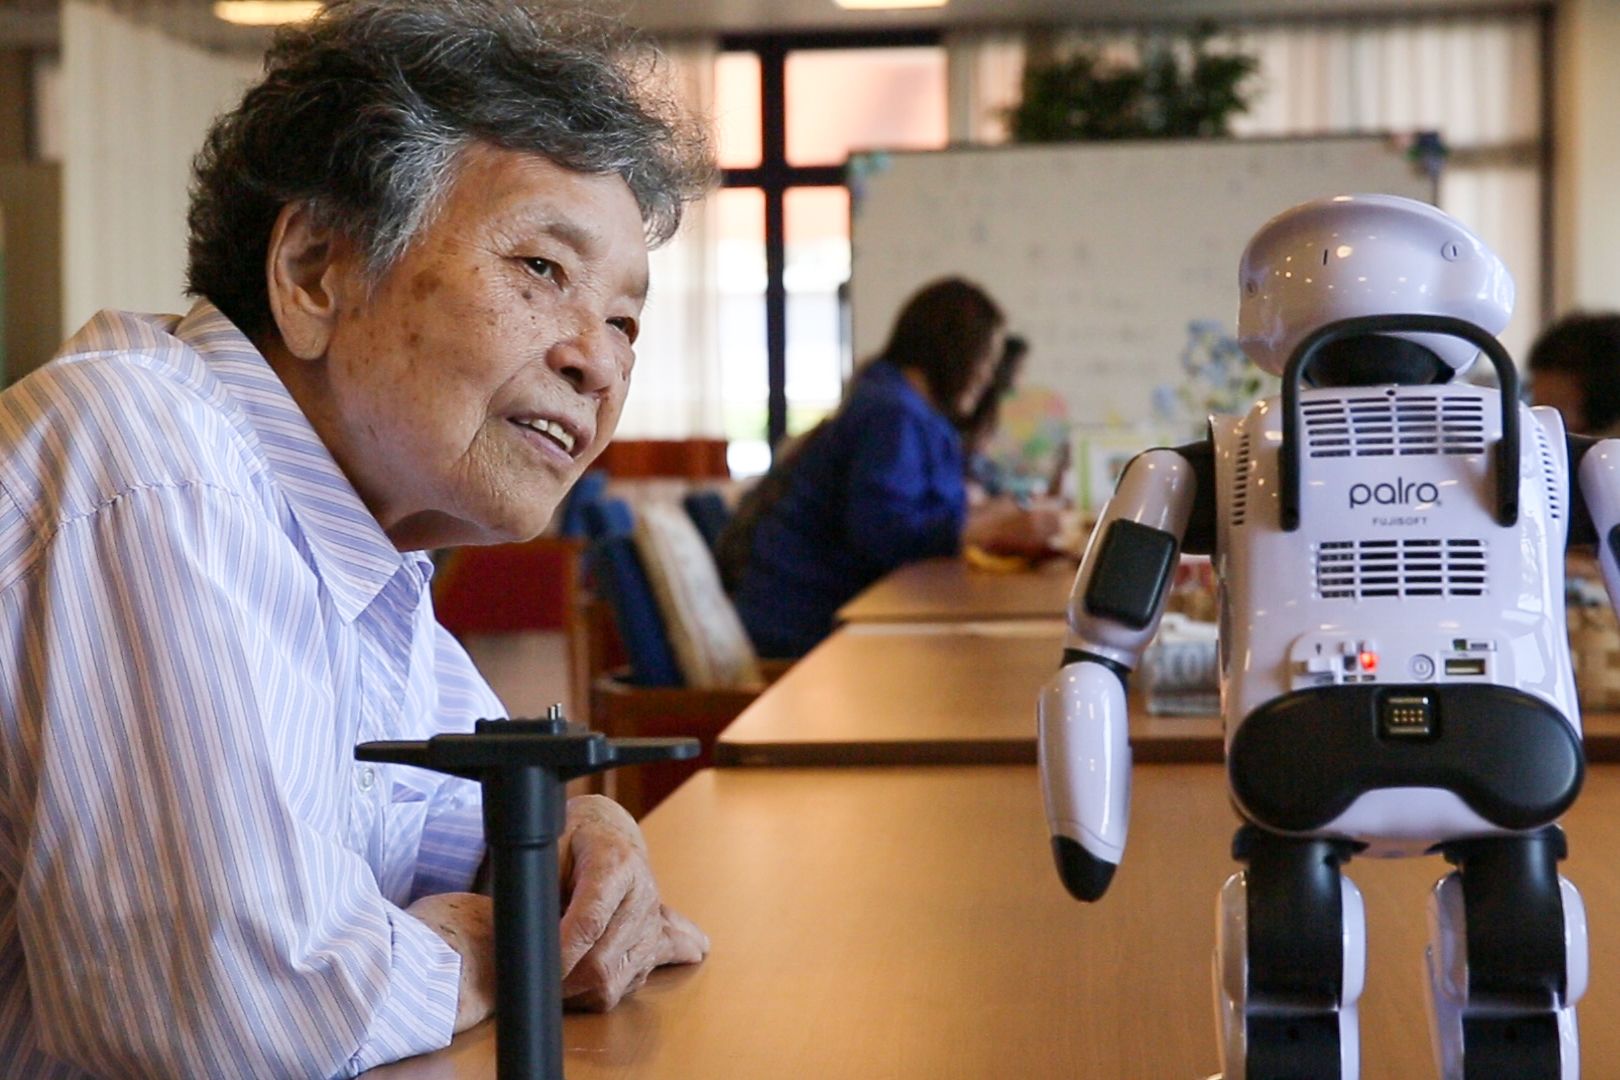 In Japan, where 27.3% of citizens are 65 and older, necessity might be just the mother of invention when it comes to approaches to elder care. This special report looks at how Japan is marrying its demographic shifts with its love of technology to find a way forward. Image by Shiho Fukada. Japan, 2017.